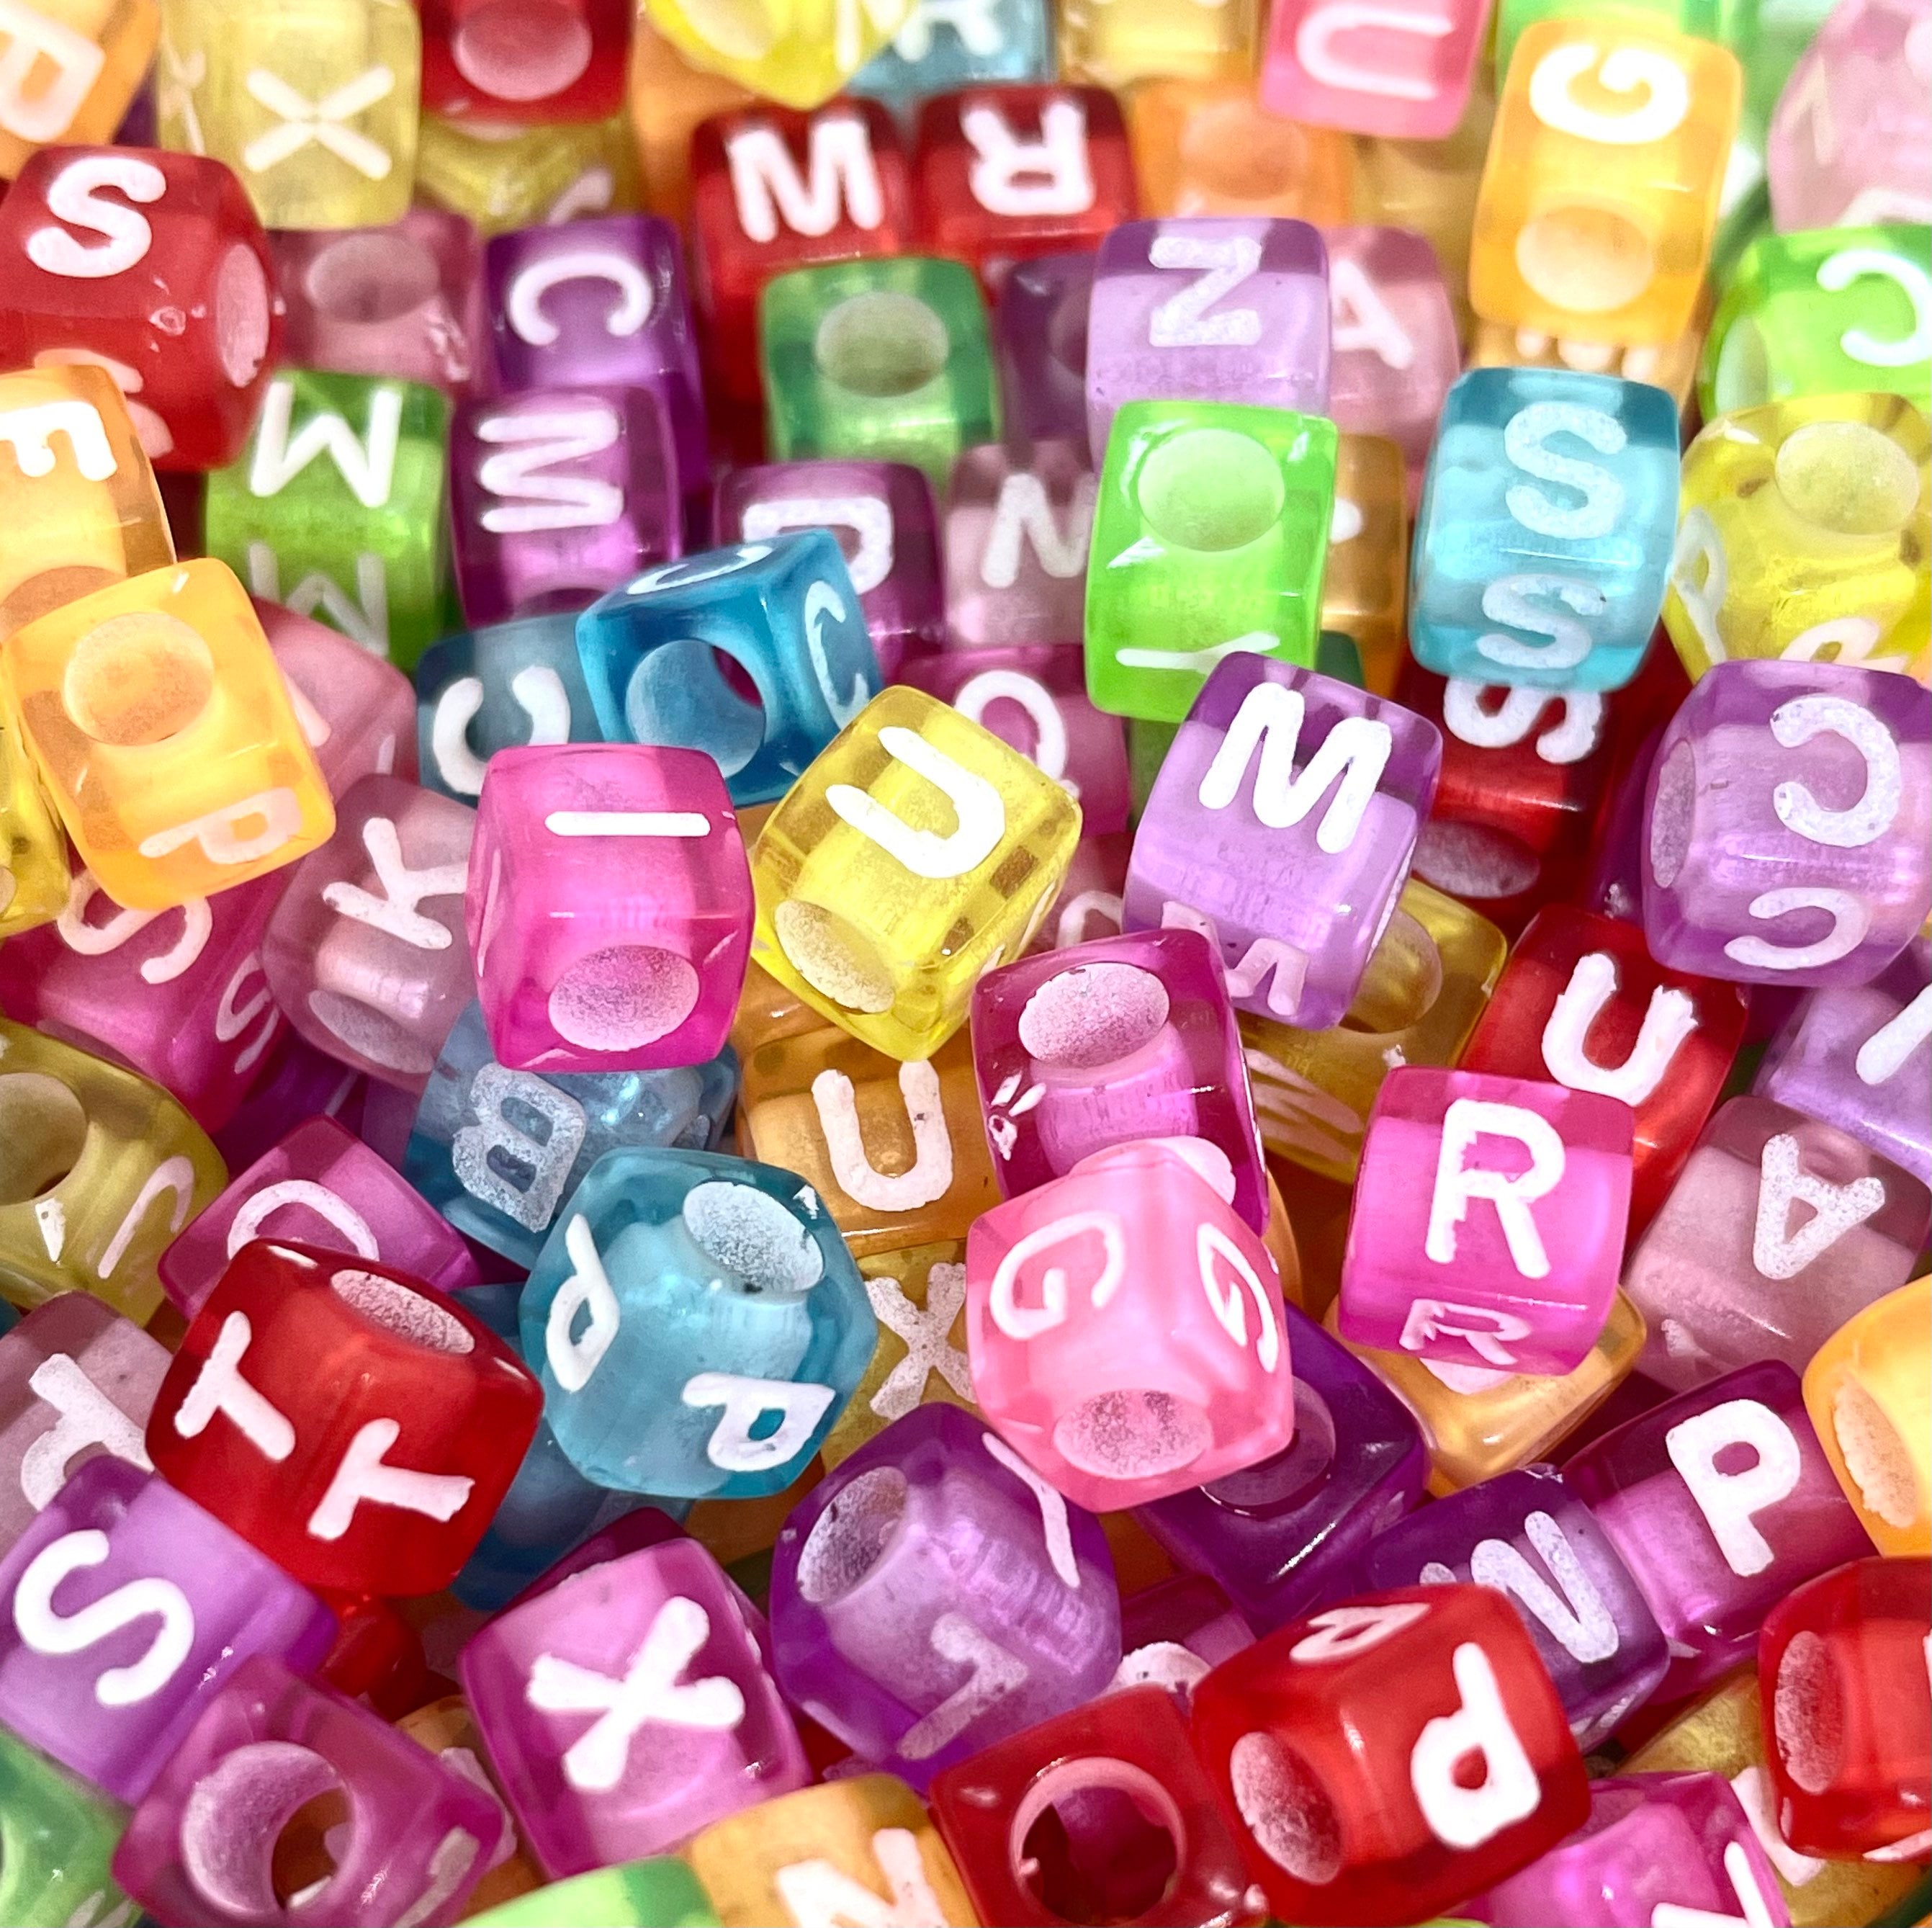  SEWACC 24 Rainbow Glass Beads Letter Beads for